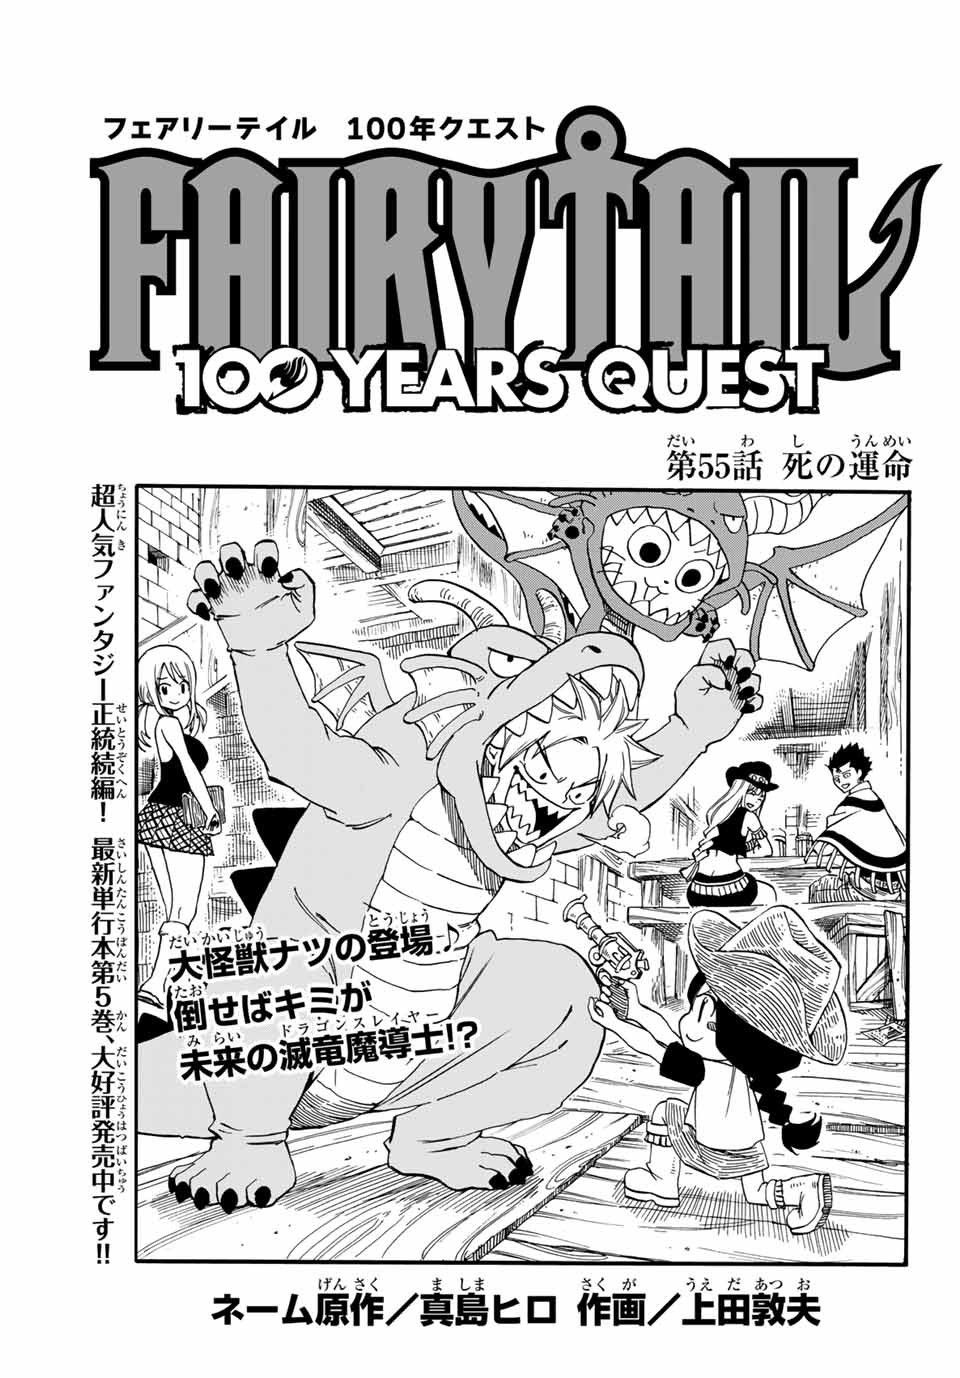 Fairy Tail 100 Years Quest Chapter 55 Fairy Tail Wiki Fandom